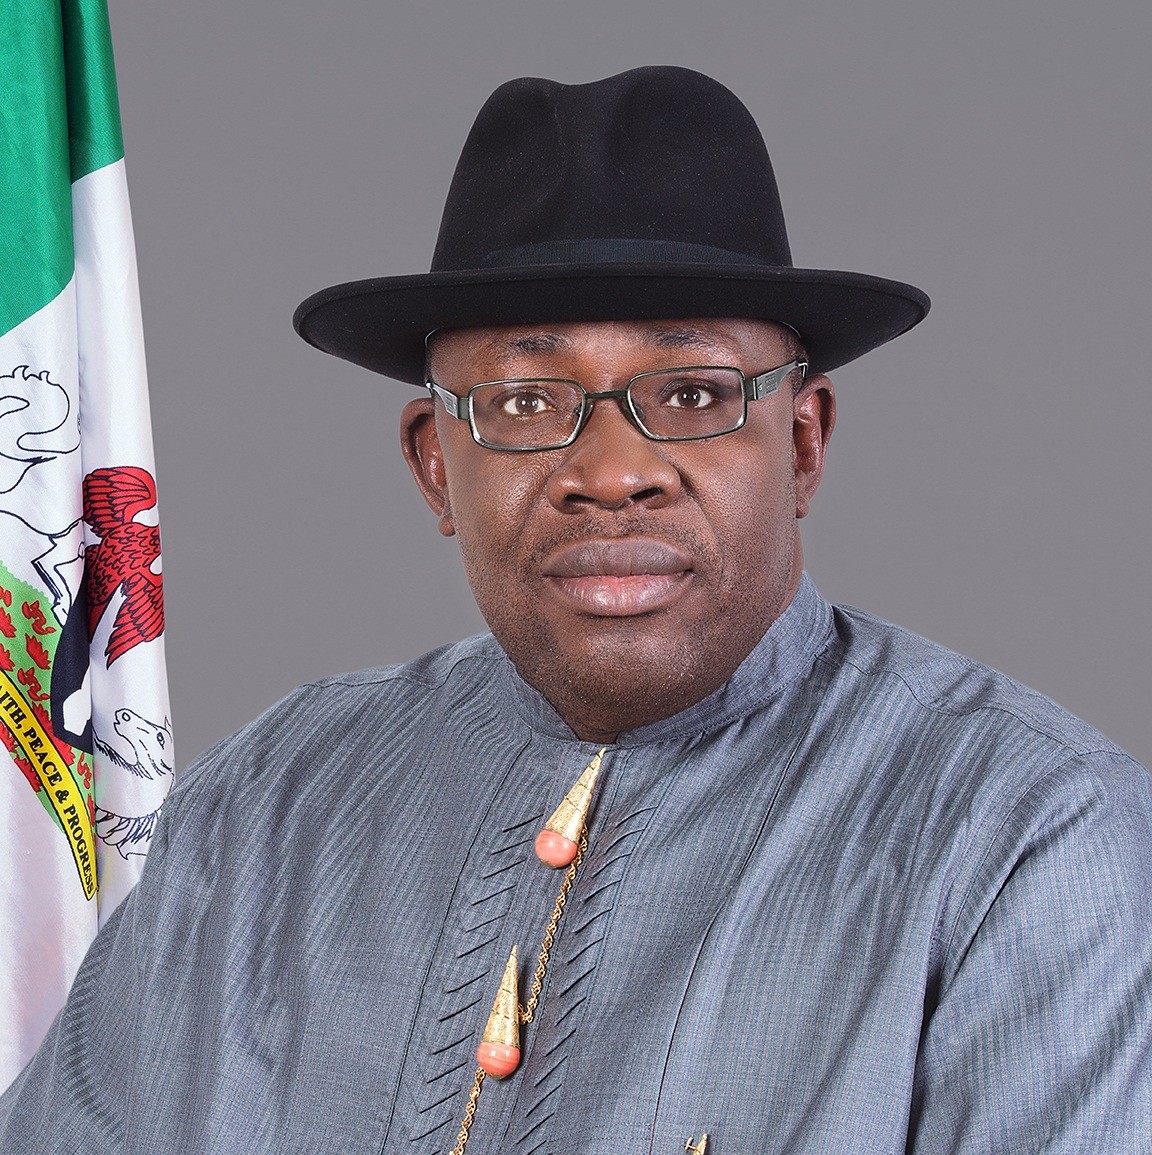 Bayelsa Might Have The Worst Maternal Mortality In South-South